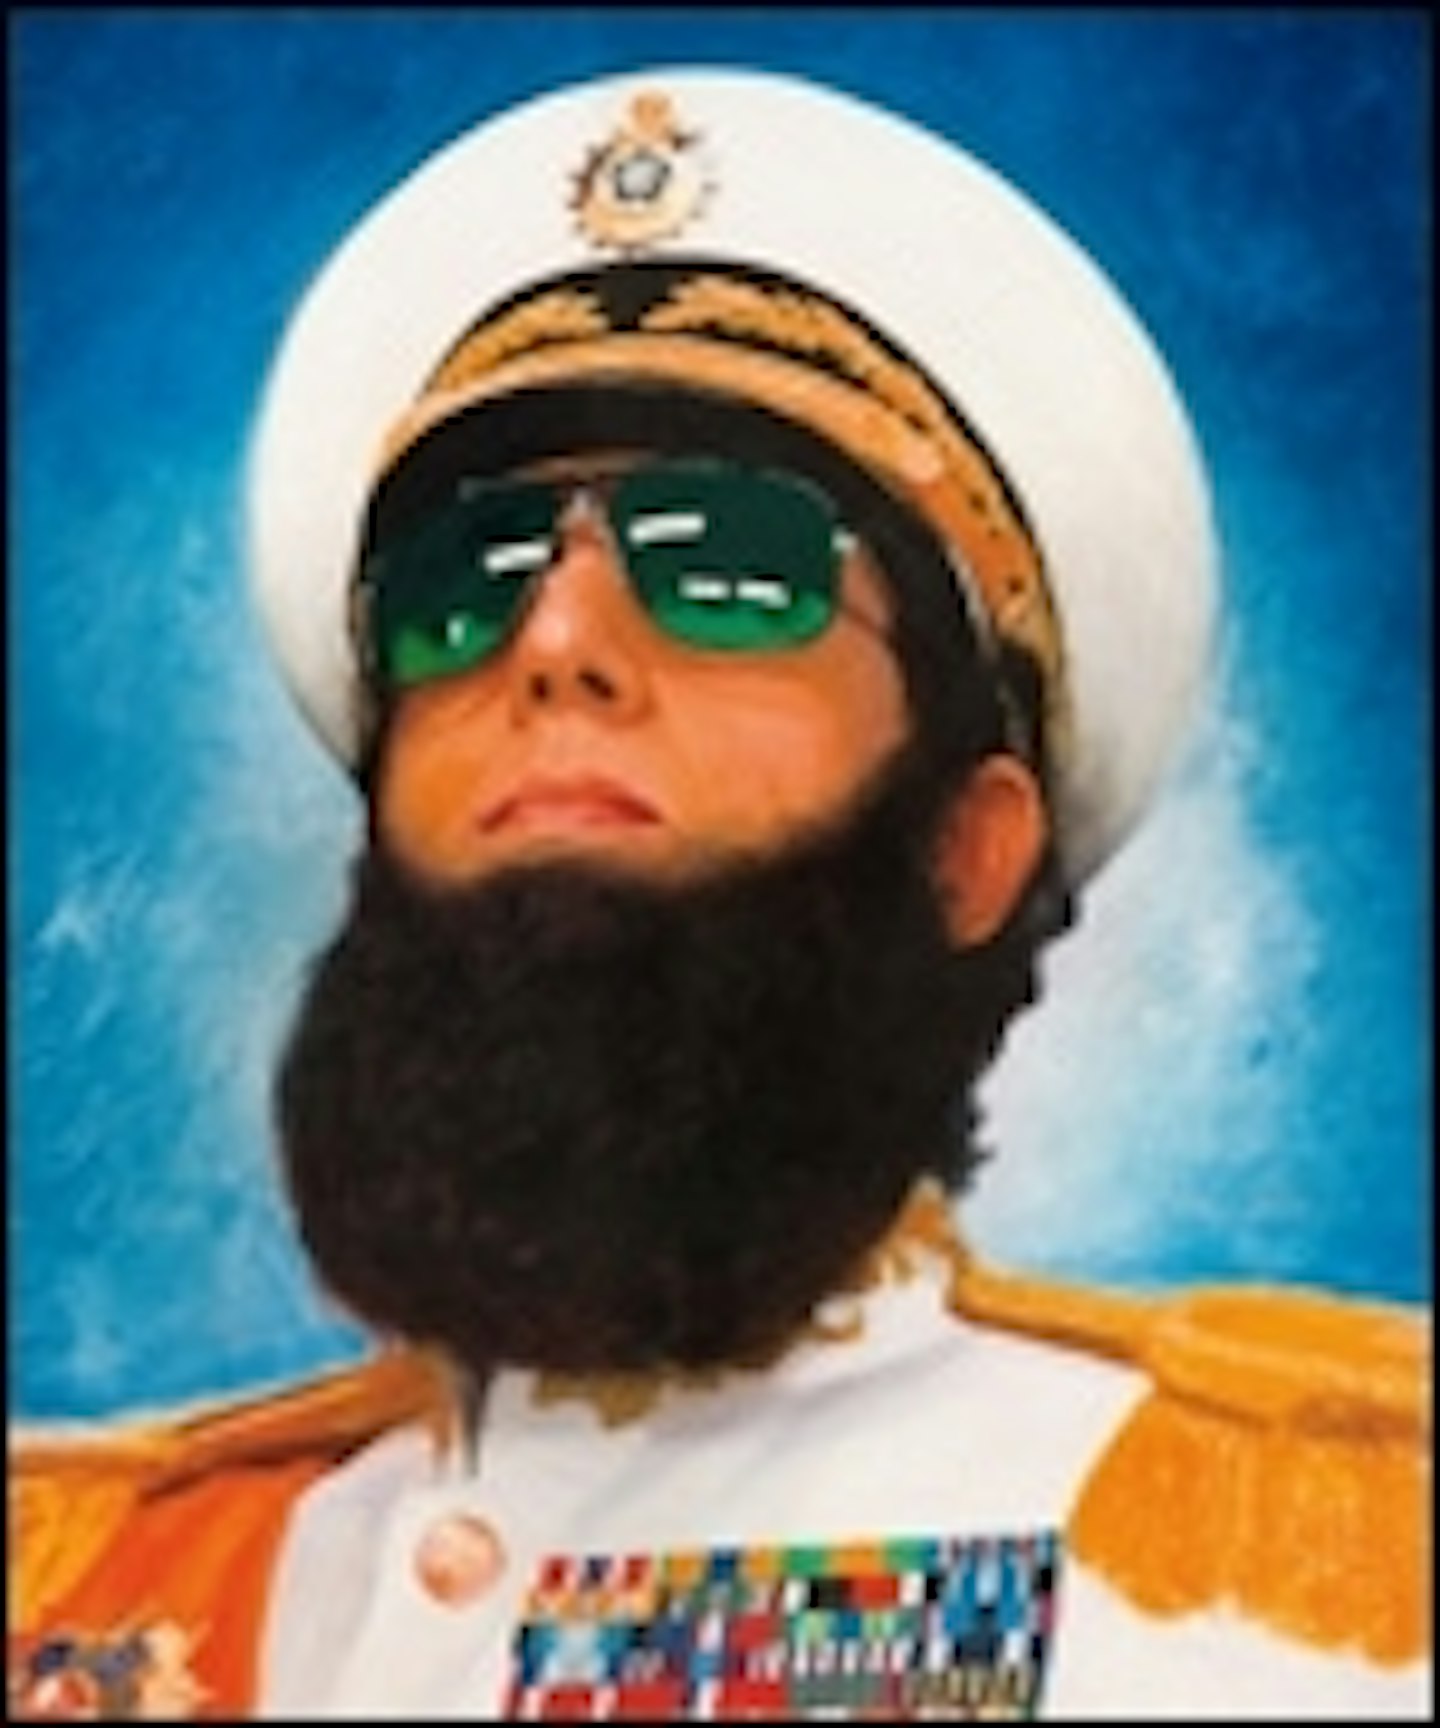 Want To See Some Of The Dictator?